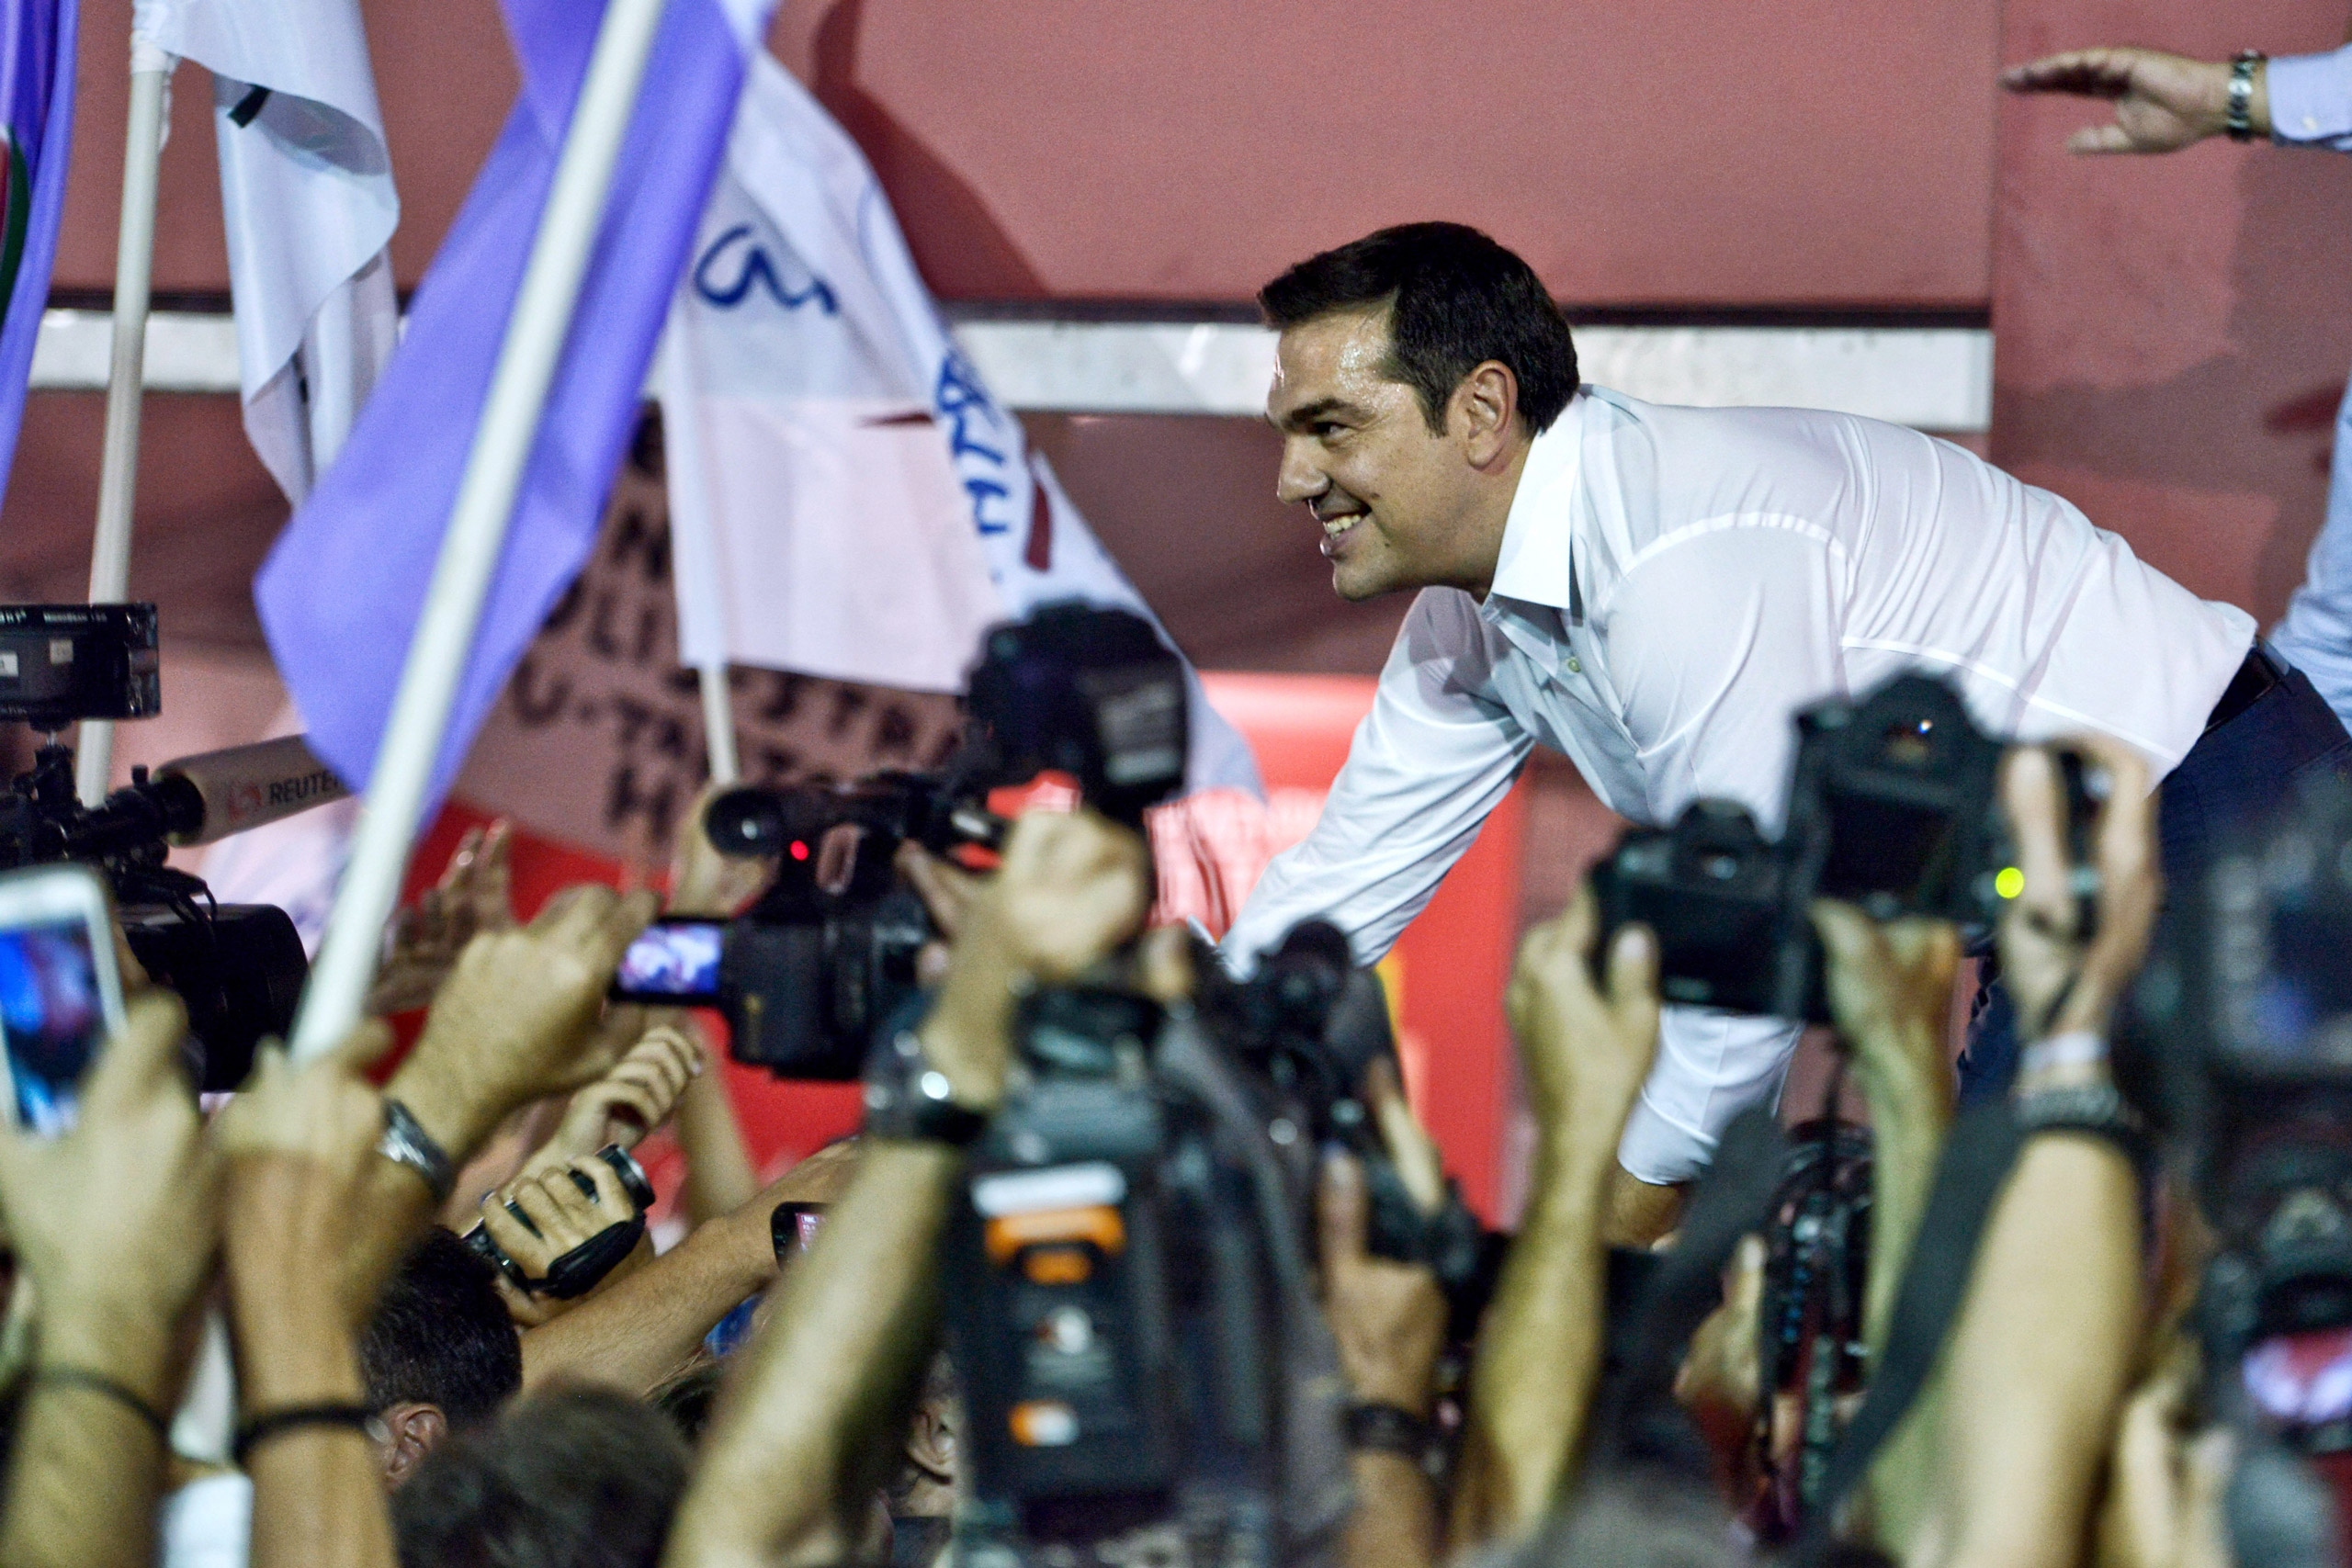 Former Greek prime minister and leader of leftist Syriza party Alexis Tsipras address supporters after winning the general election in Athens on Sept. 20, 2015. (Milos Bicanski—Getty Images)